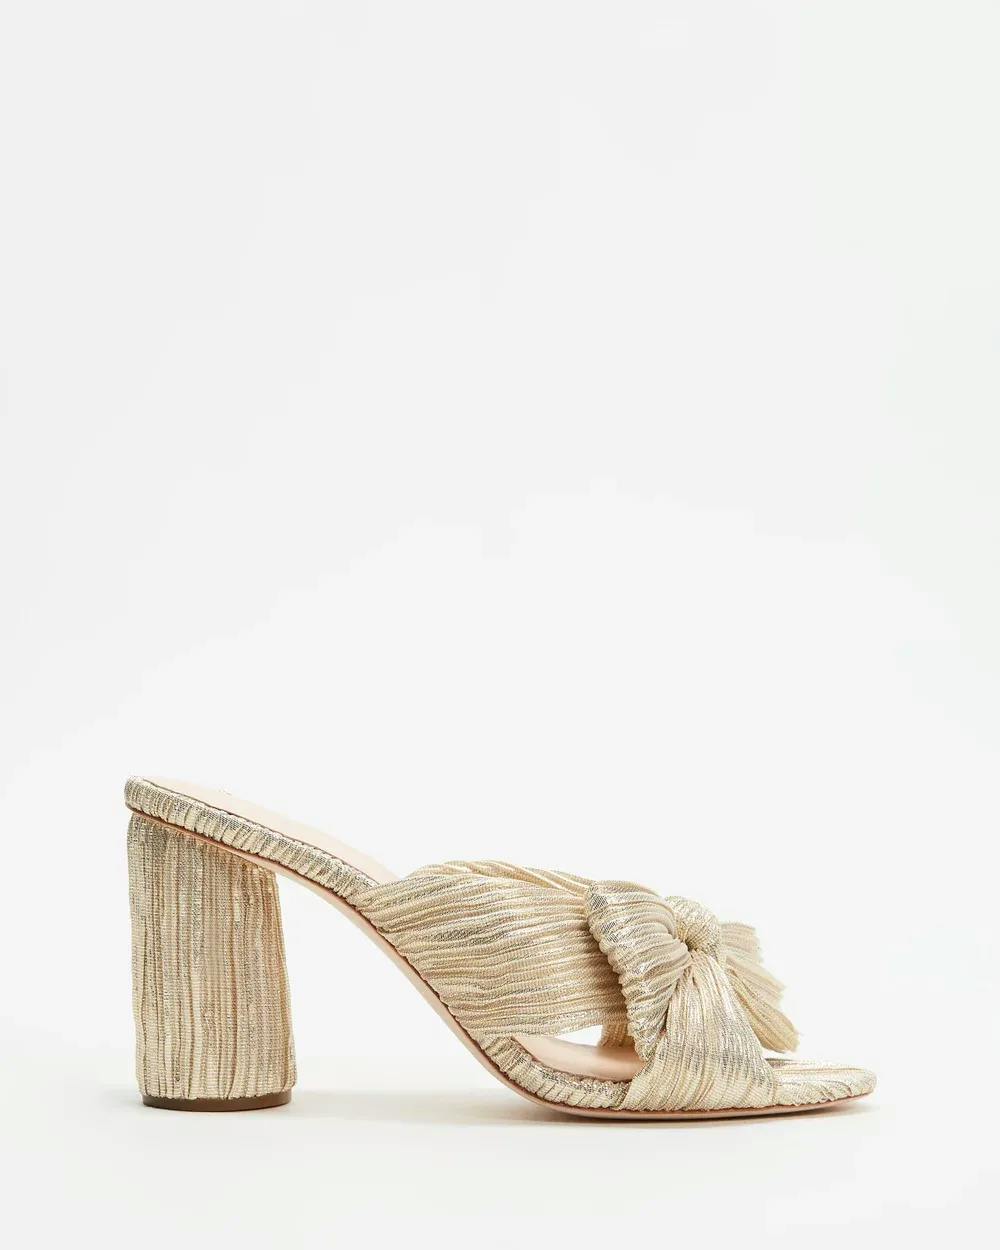 A single gold-toned high-heeled sandal is shown against a white background. The sandal has a thick, block heel and features a crinkled texture with a knot detail at the front strap. The heel and strap are made from the same textured material.